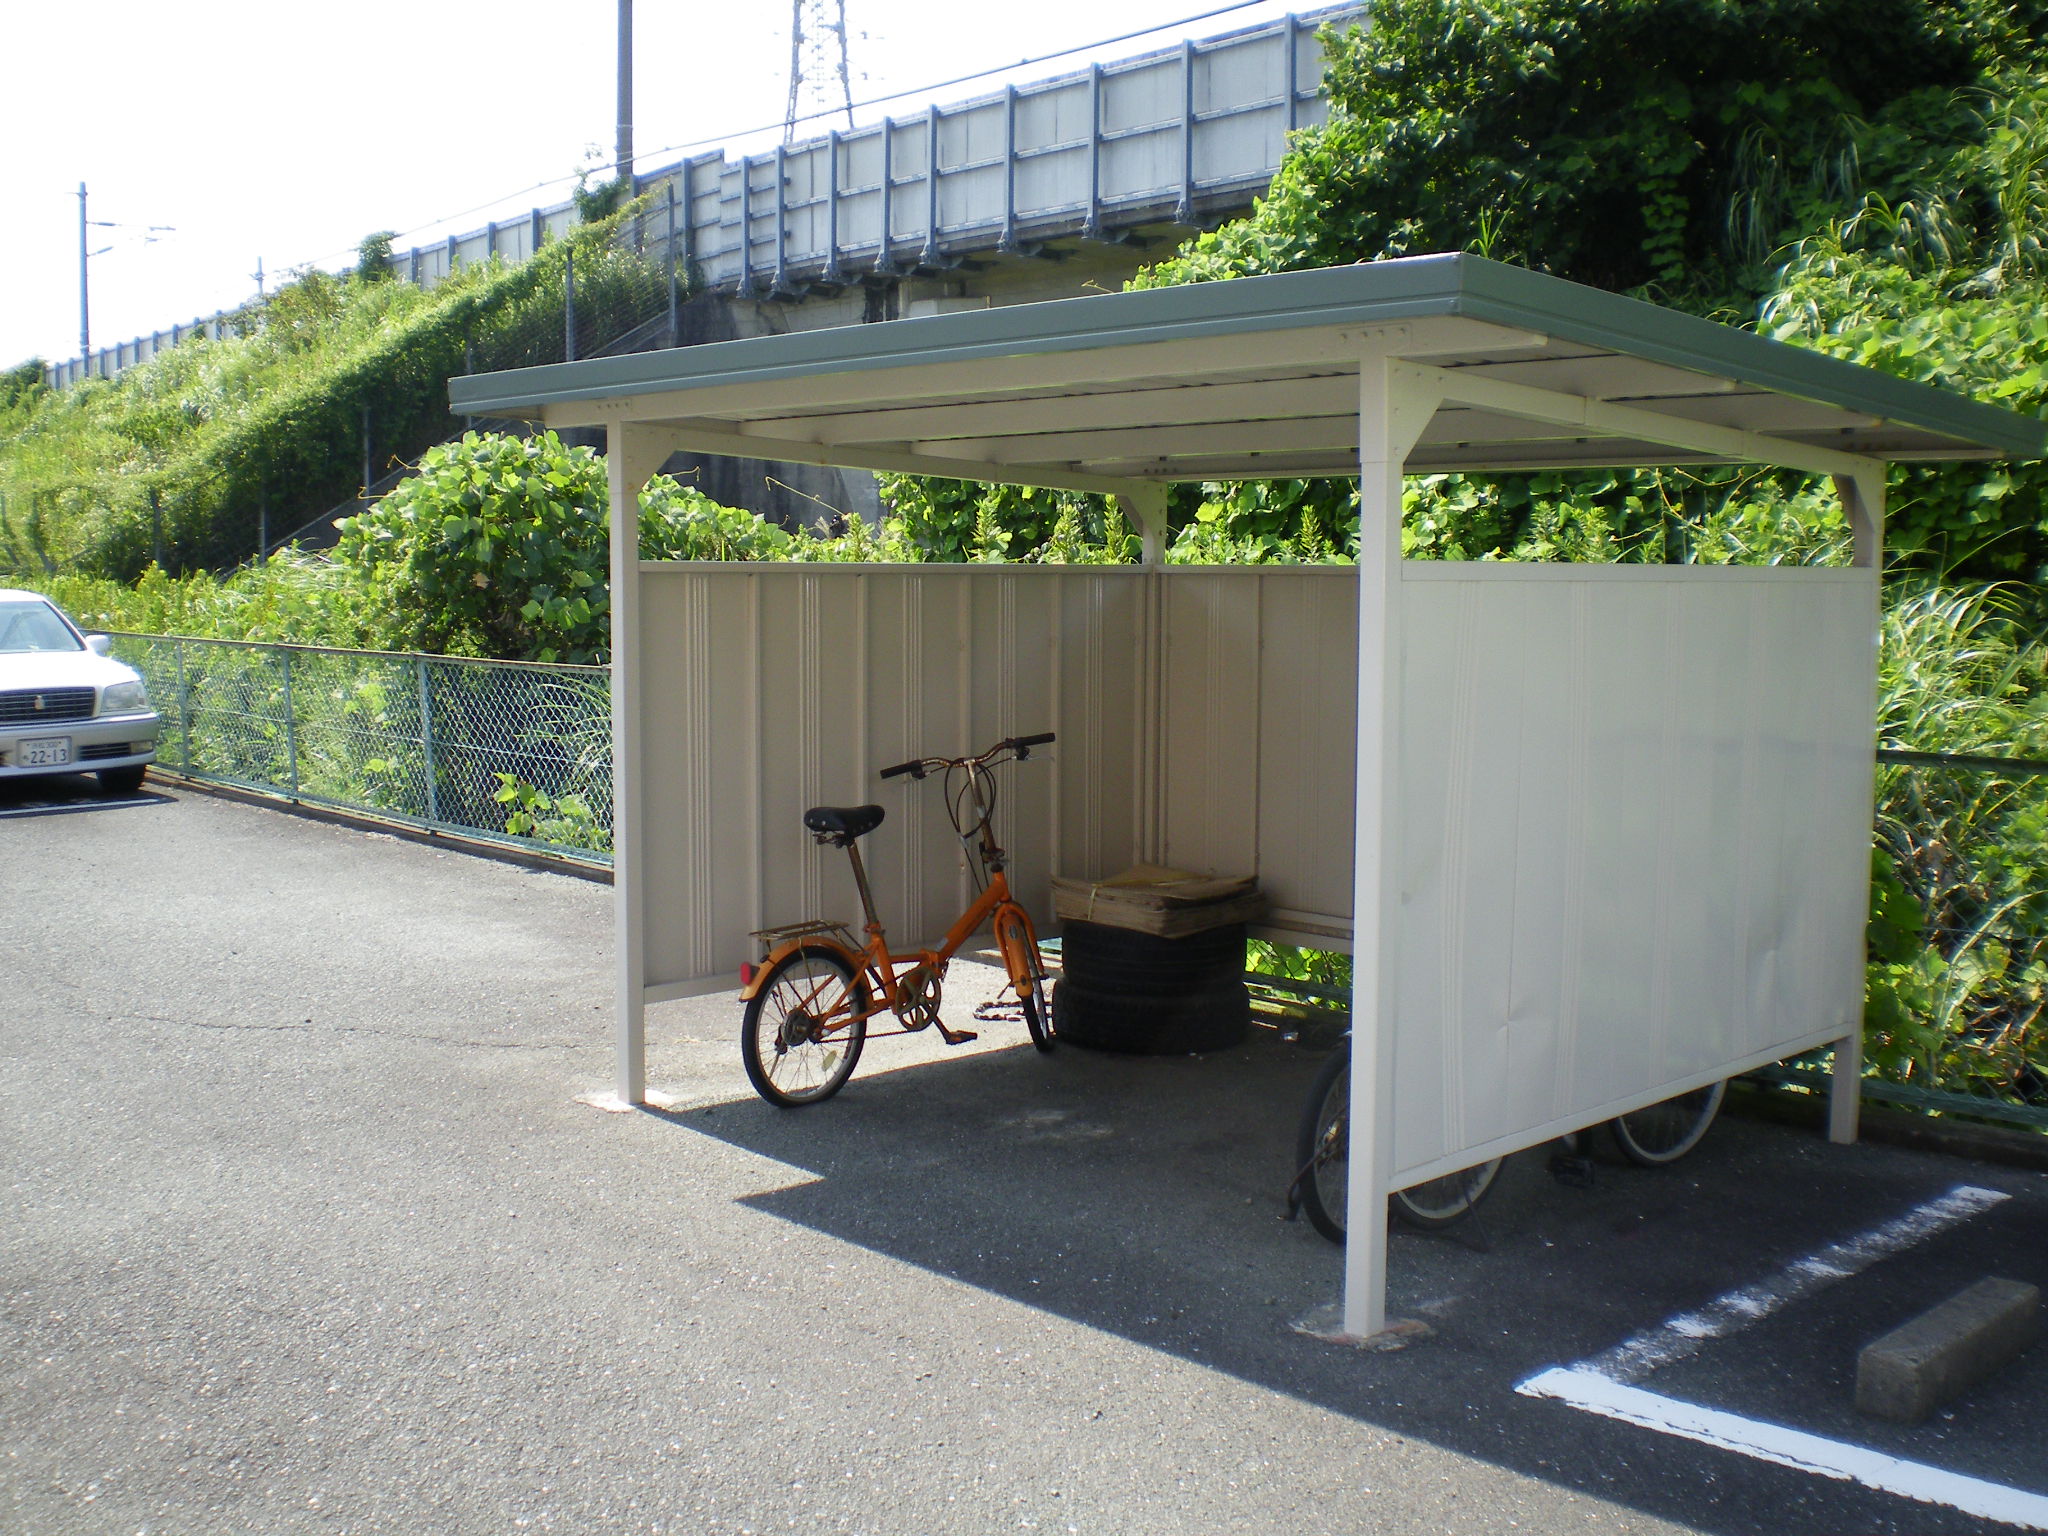 Other common areas. Bicycle parking lot (there are two places)